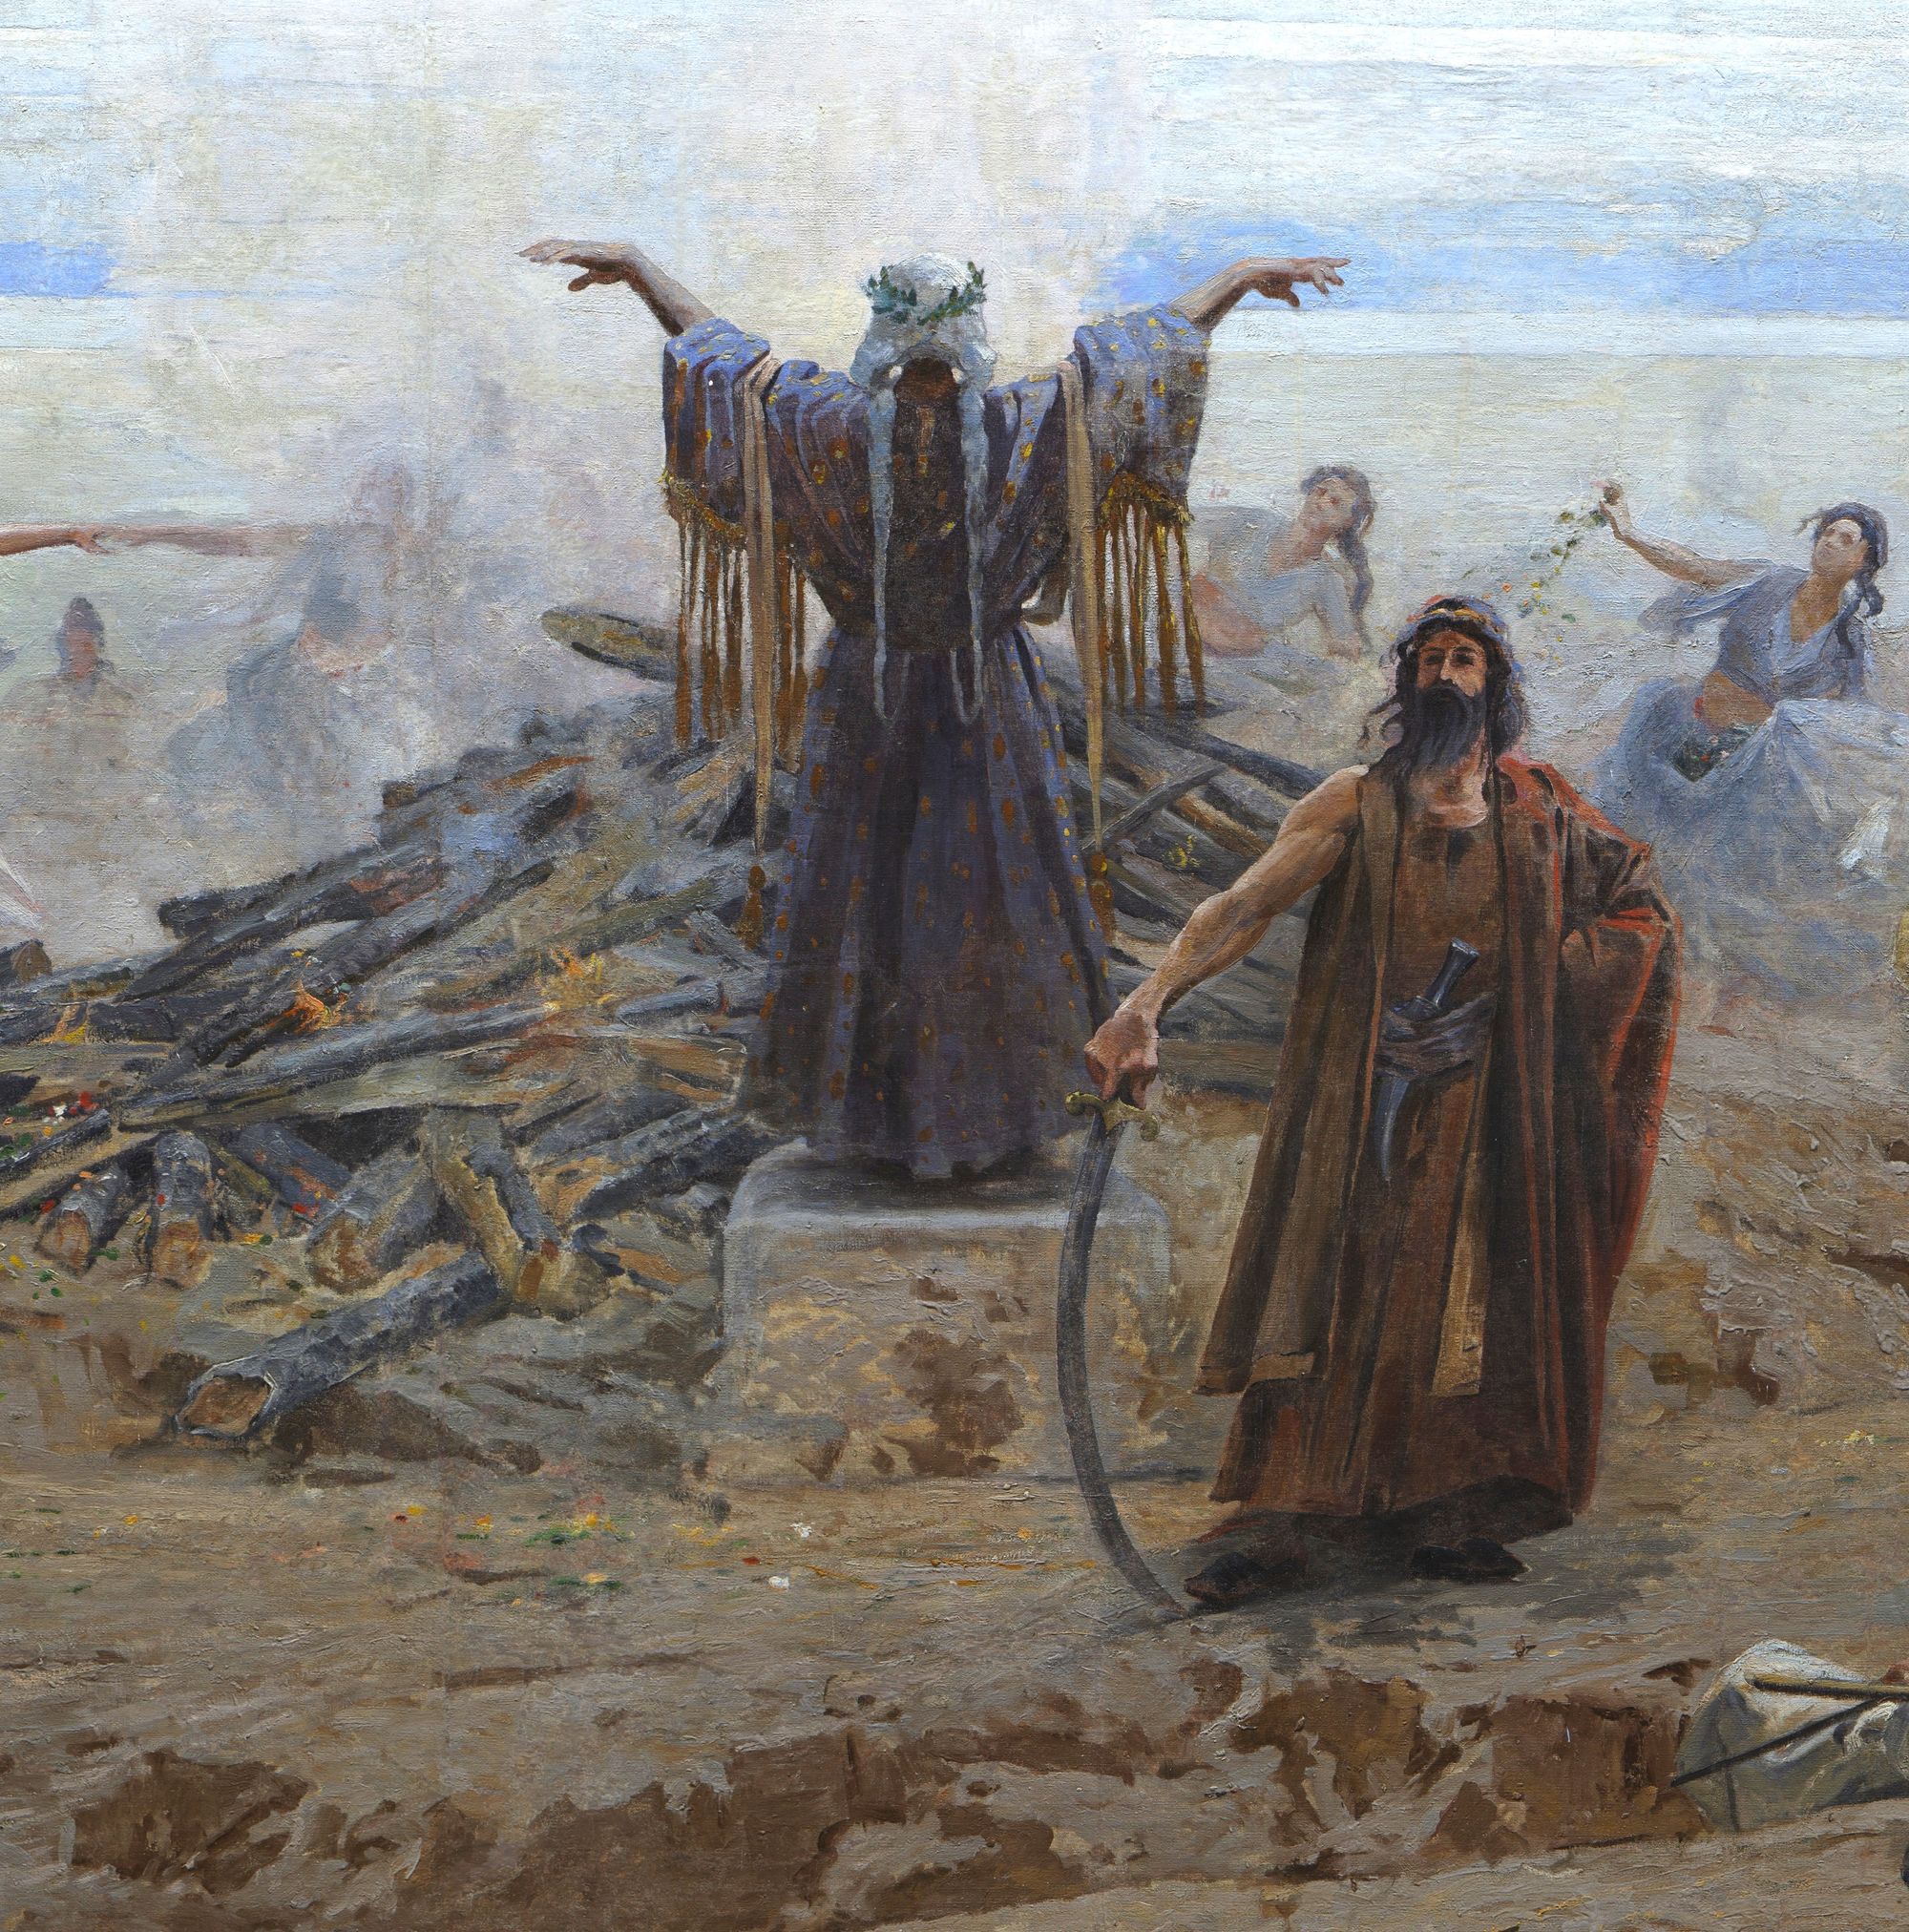 Detail of Arrival of the Hungarians by Árpád Feszty (early 1890s).